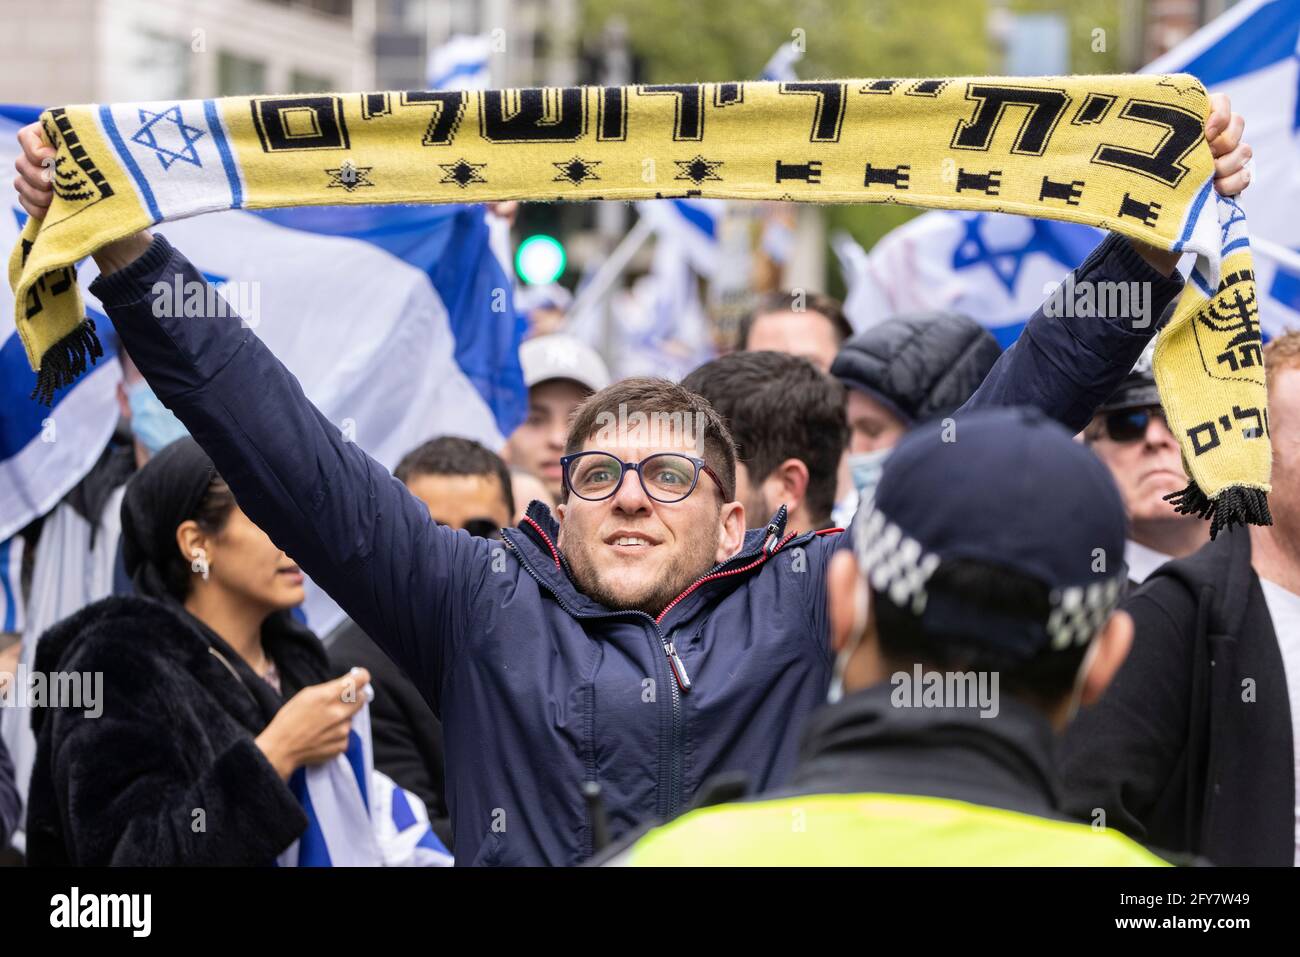 Portrait of protester holding up scarf, Zionist demonstration, Embassy of Israel, London, 23 May 2021 Stock Photo